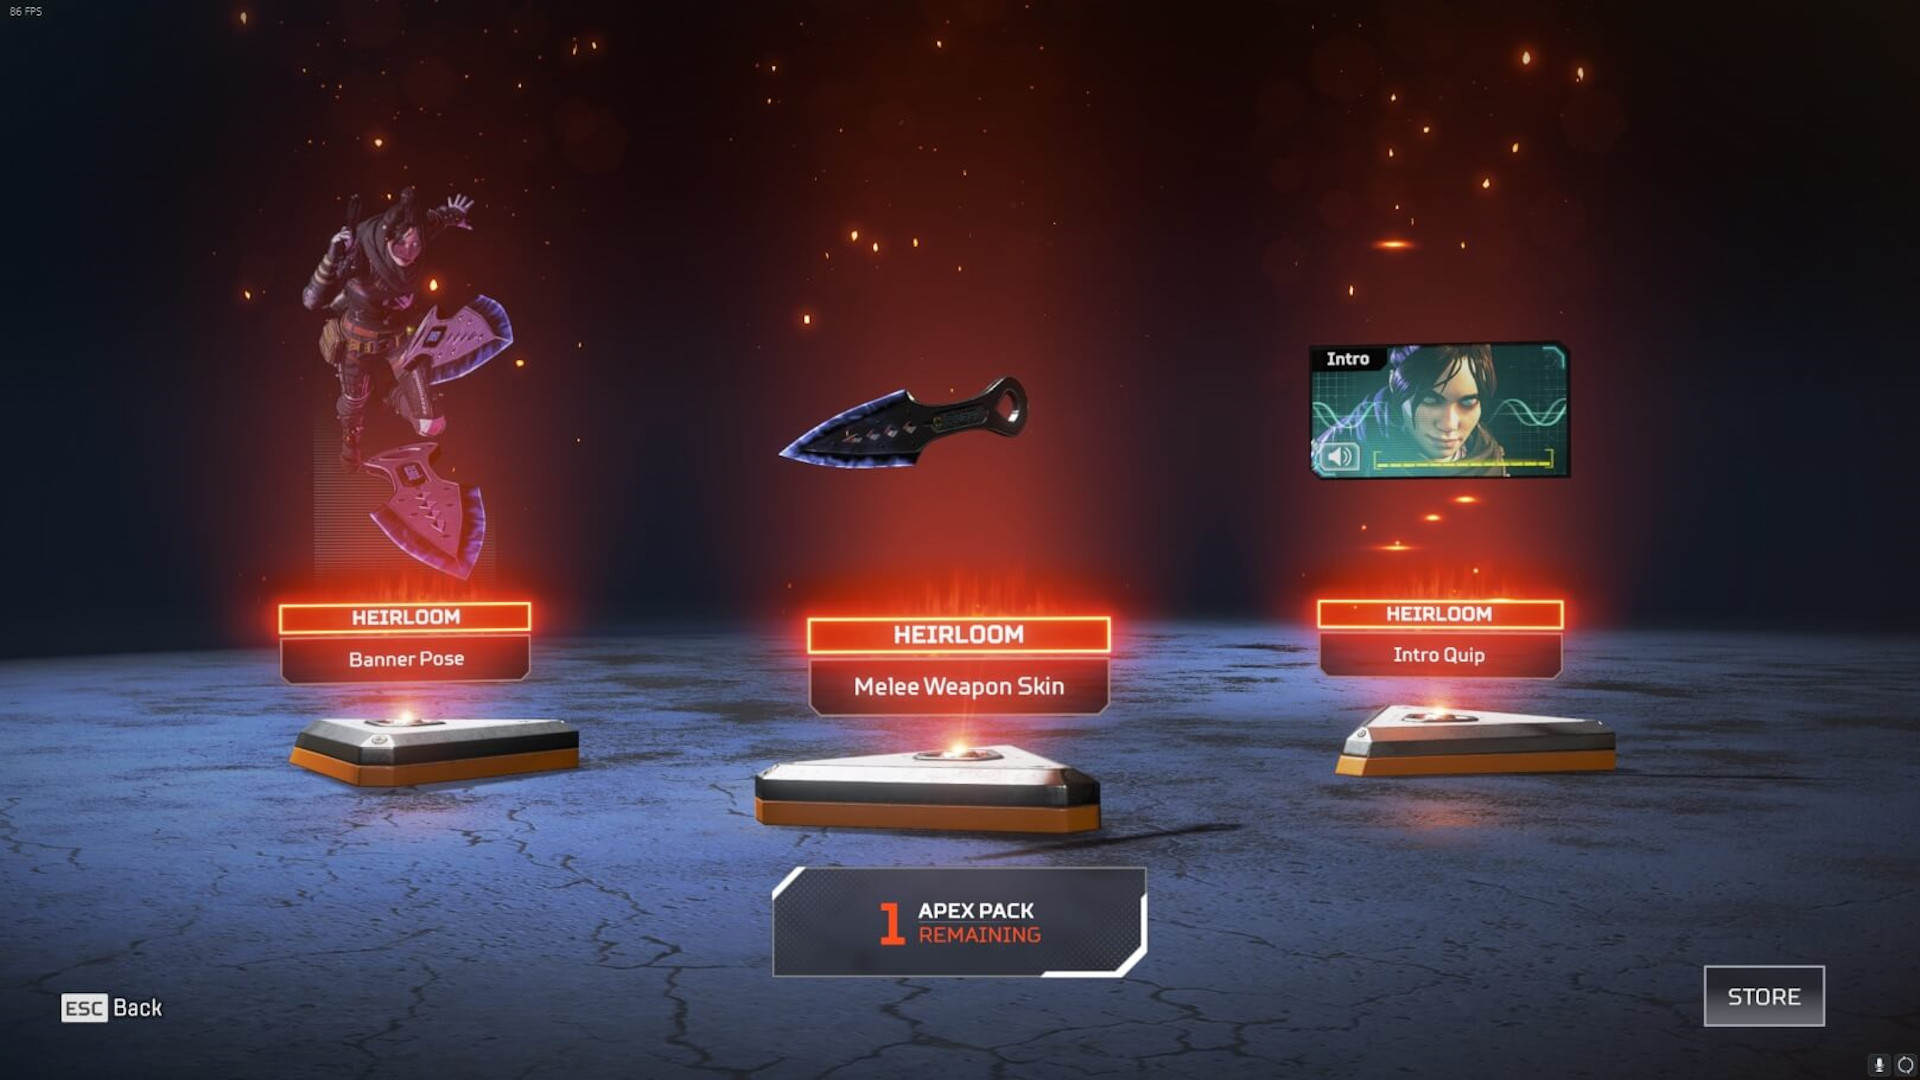 Apex Legends Heirlooms: A quip, banner pose, and melee skin for Wraith in the Apex Pack loot screen.